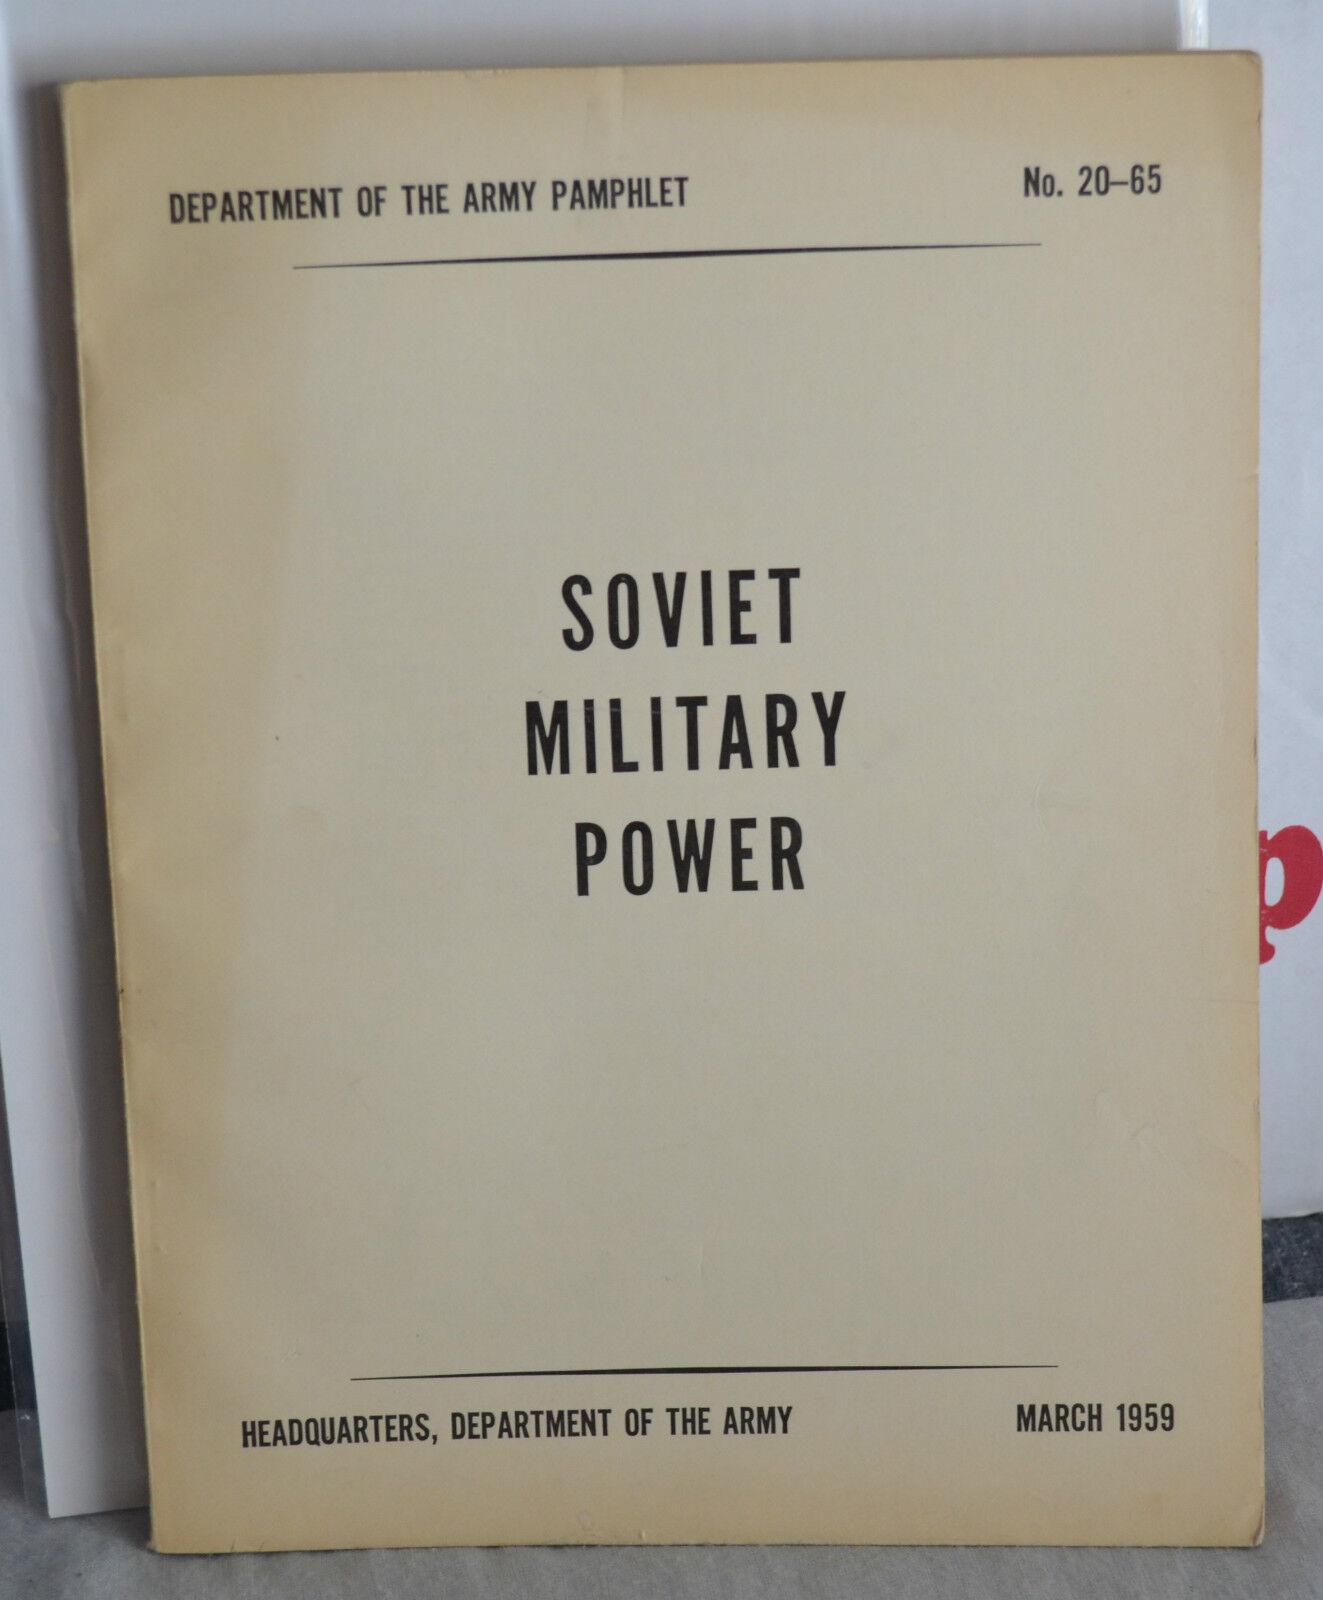 VTG 1959 U.S. Army Pamphlet No. 20-65 Soviet Military Power Cold War Report N